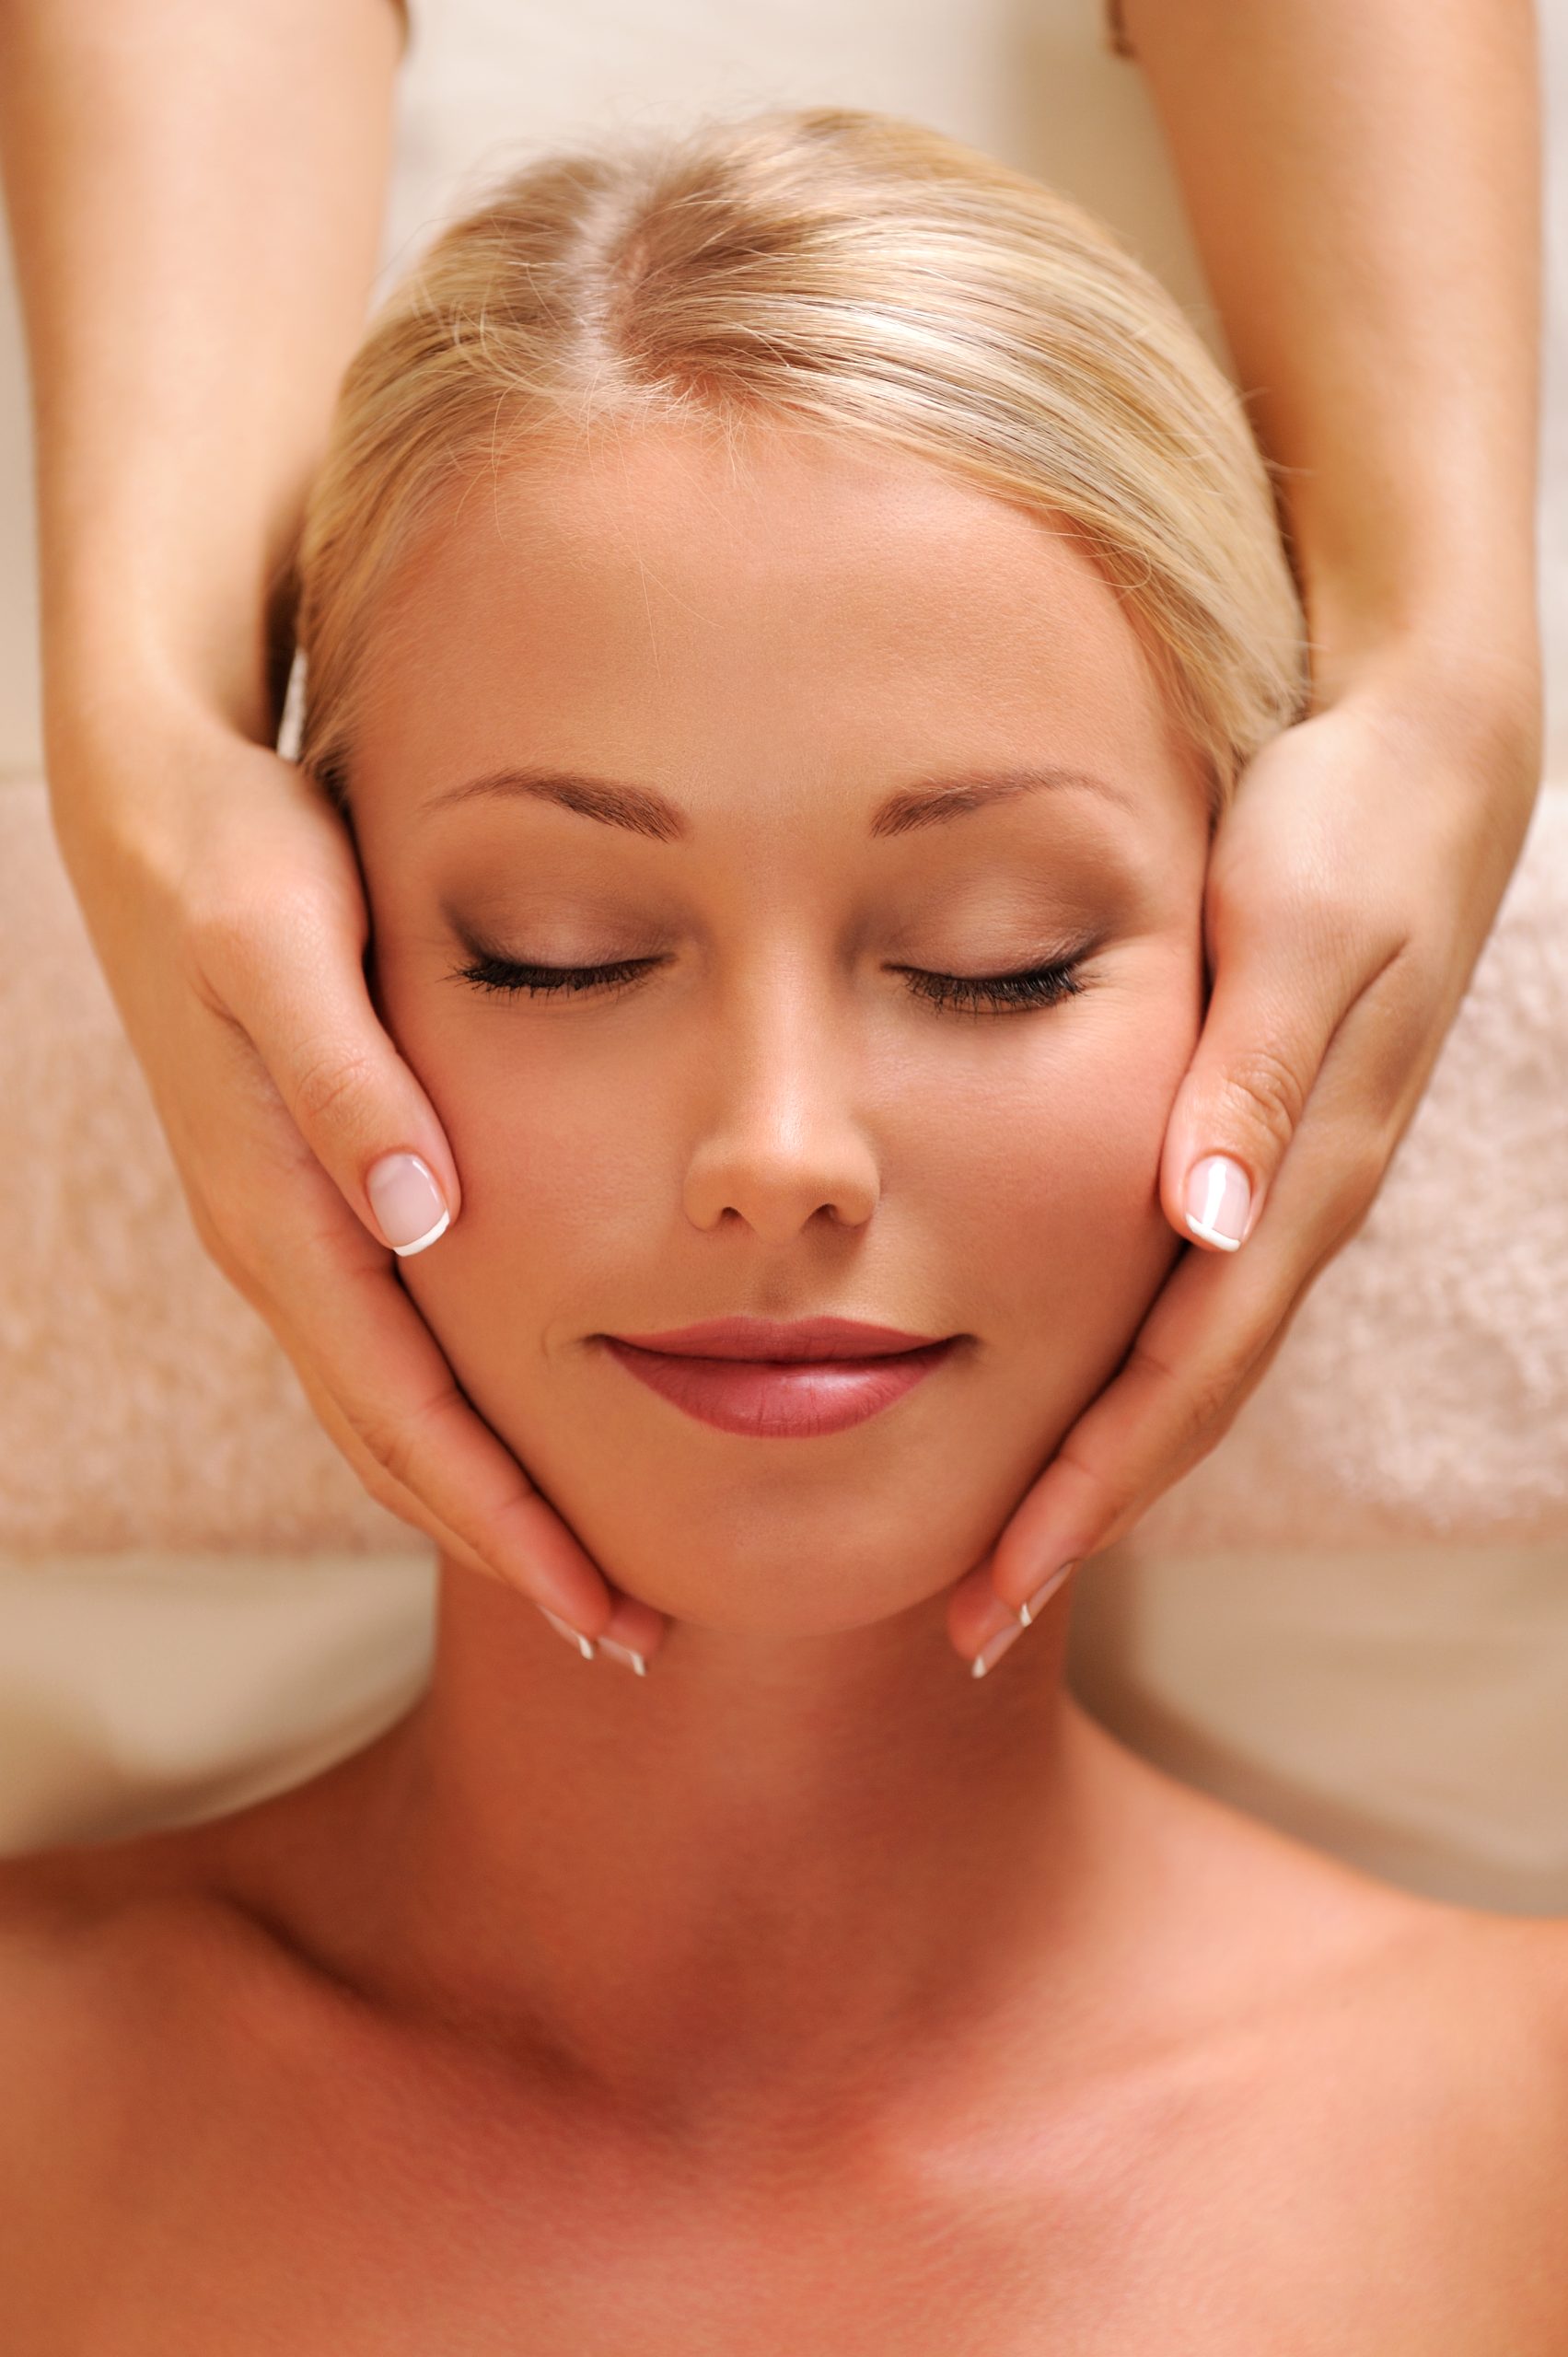 Beauty and Nail Technology - Facial Therapy